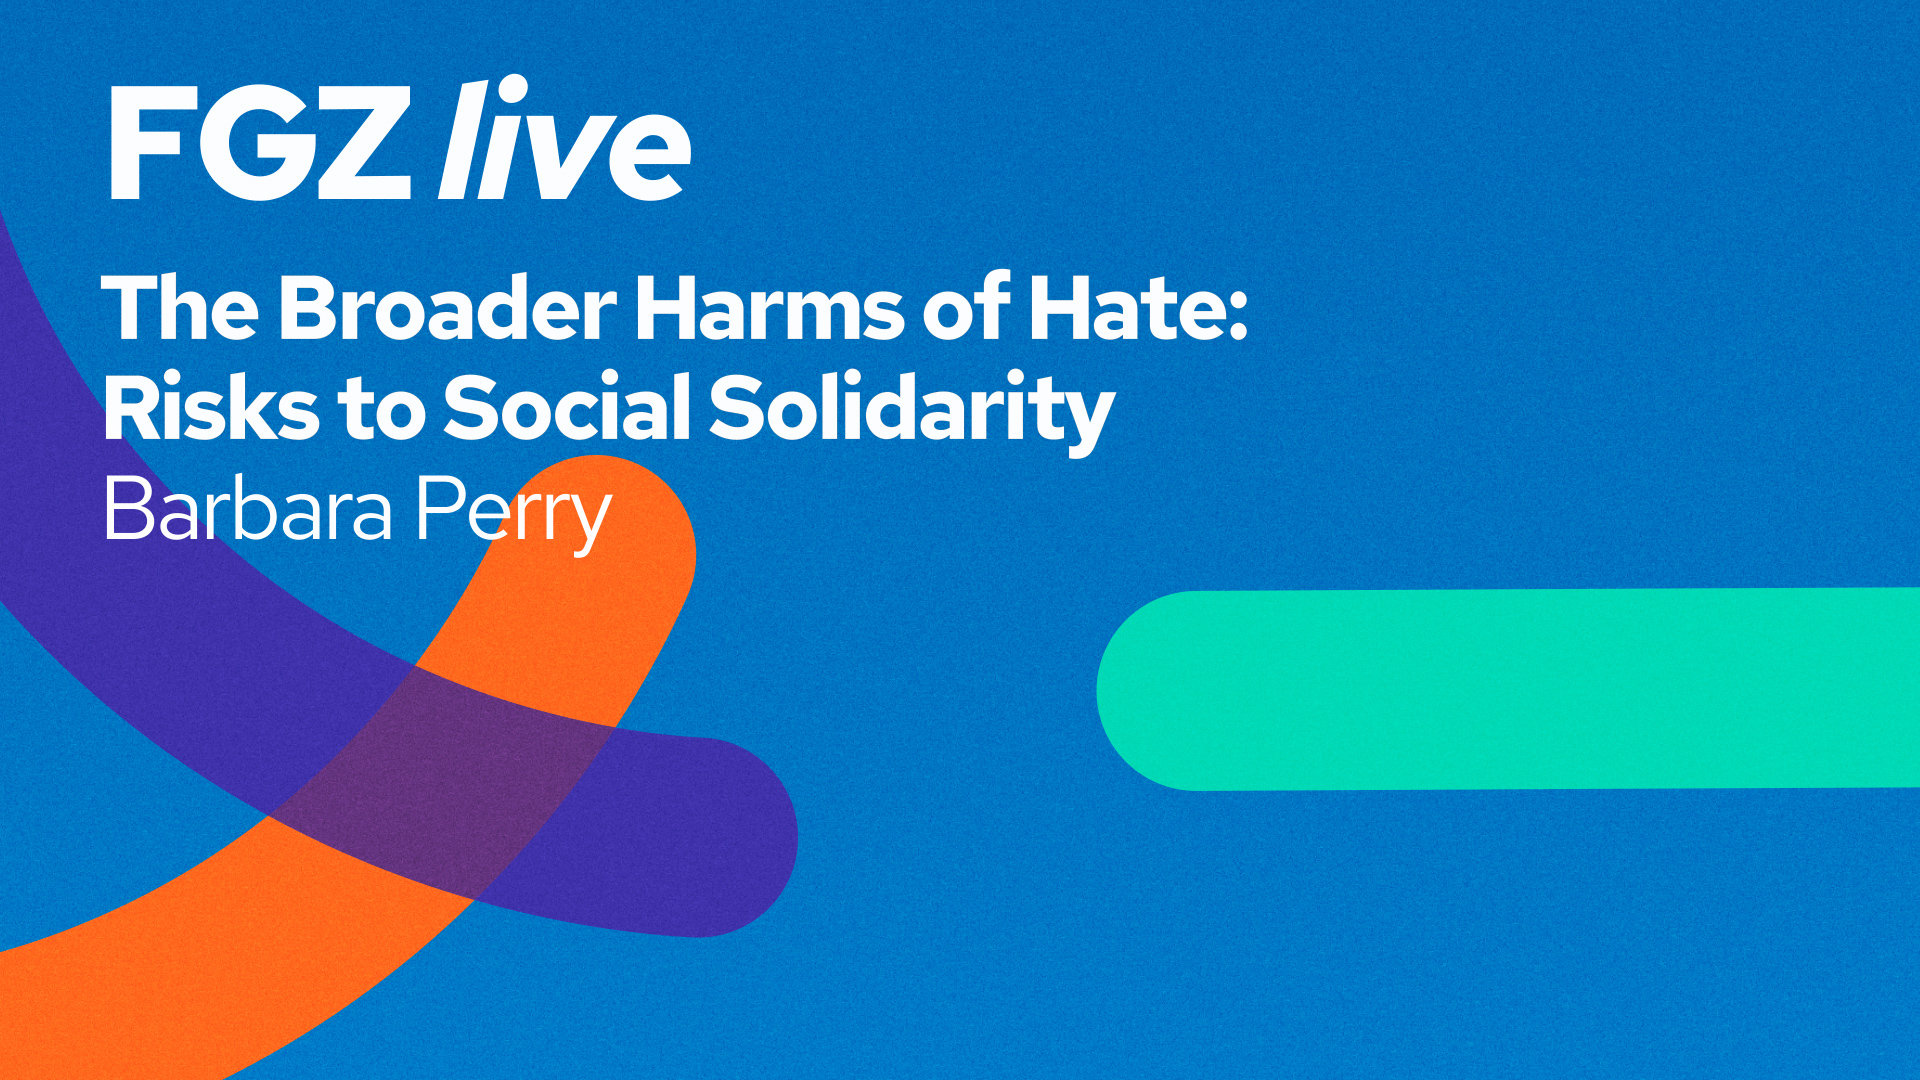 Barbara Perry: The Broader Harms of Hate. Risks to Social Solidarity – FGZ live - Image